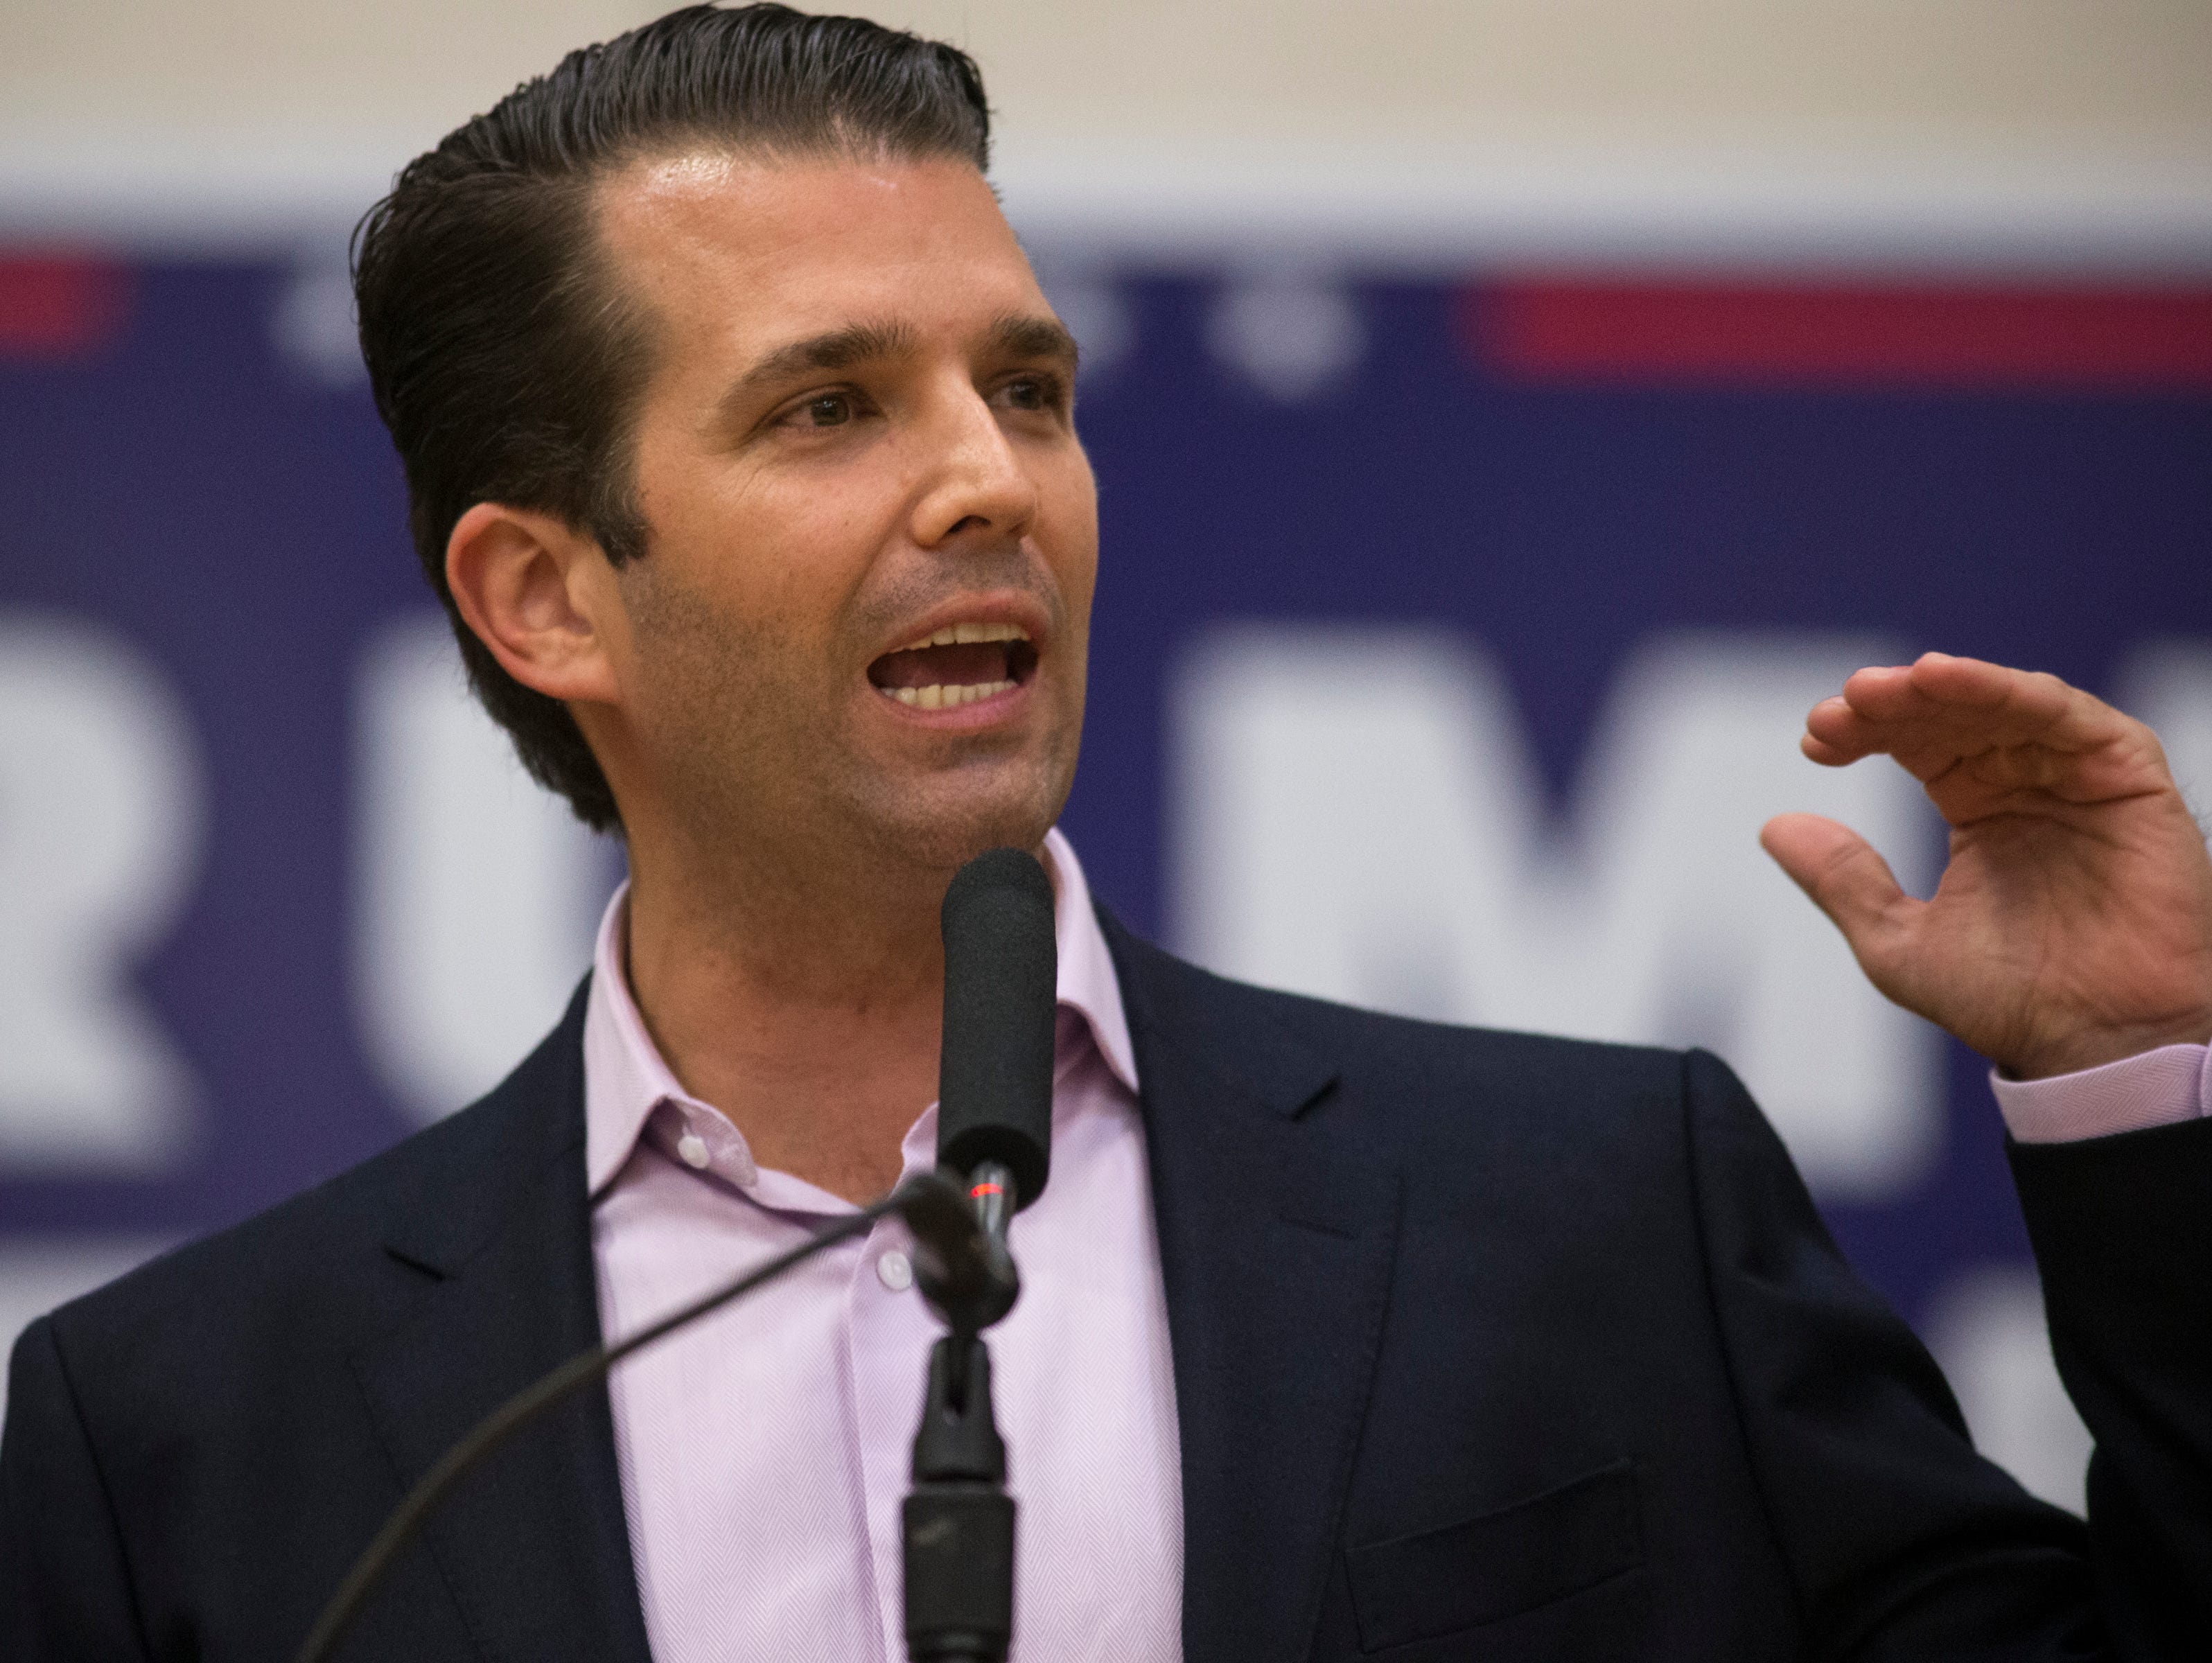 Donald Trump Jr. speaks during a rally for his father, Republican presidential candidate Donald Trump, on Oct. 27, 2016, at the ASU Sun Devil Recreation Center in Tempe.